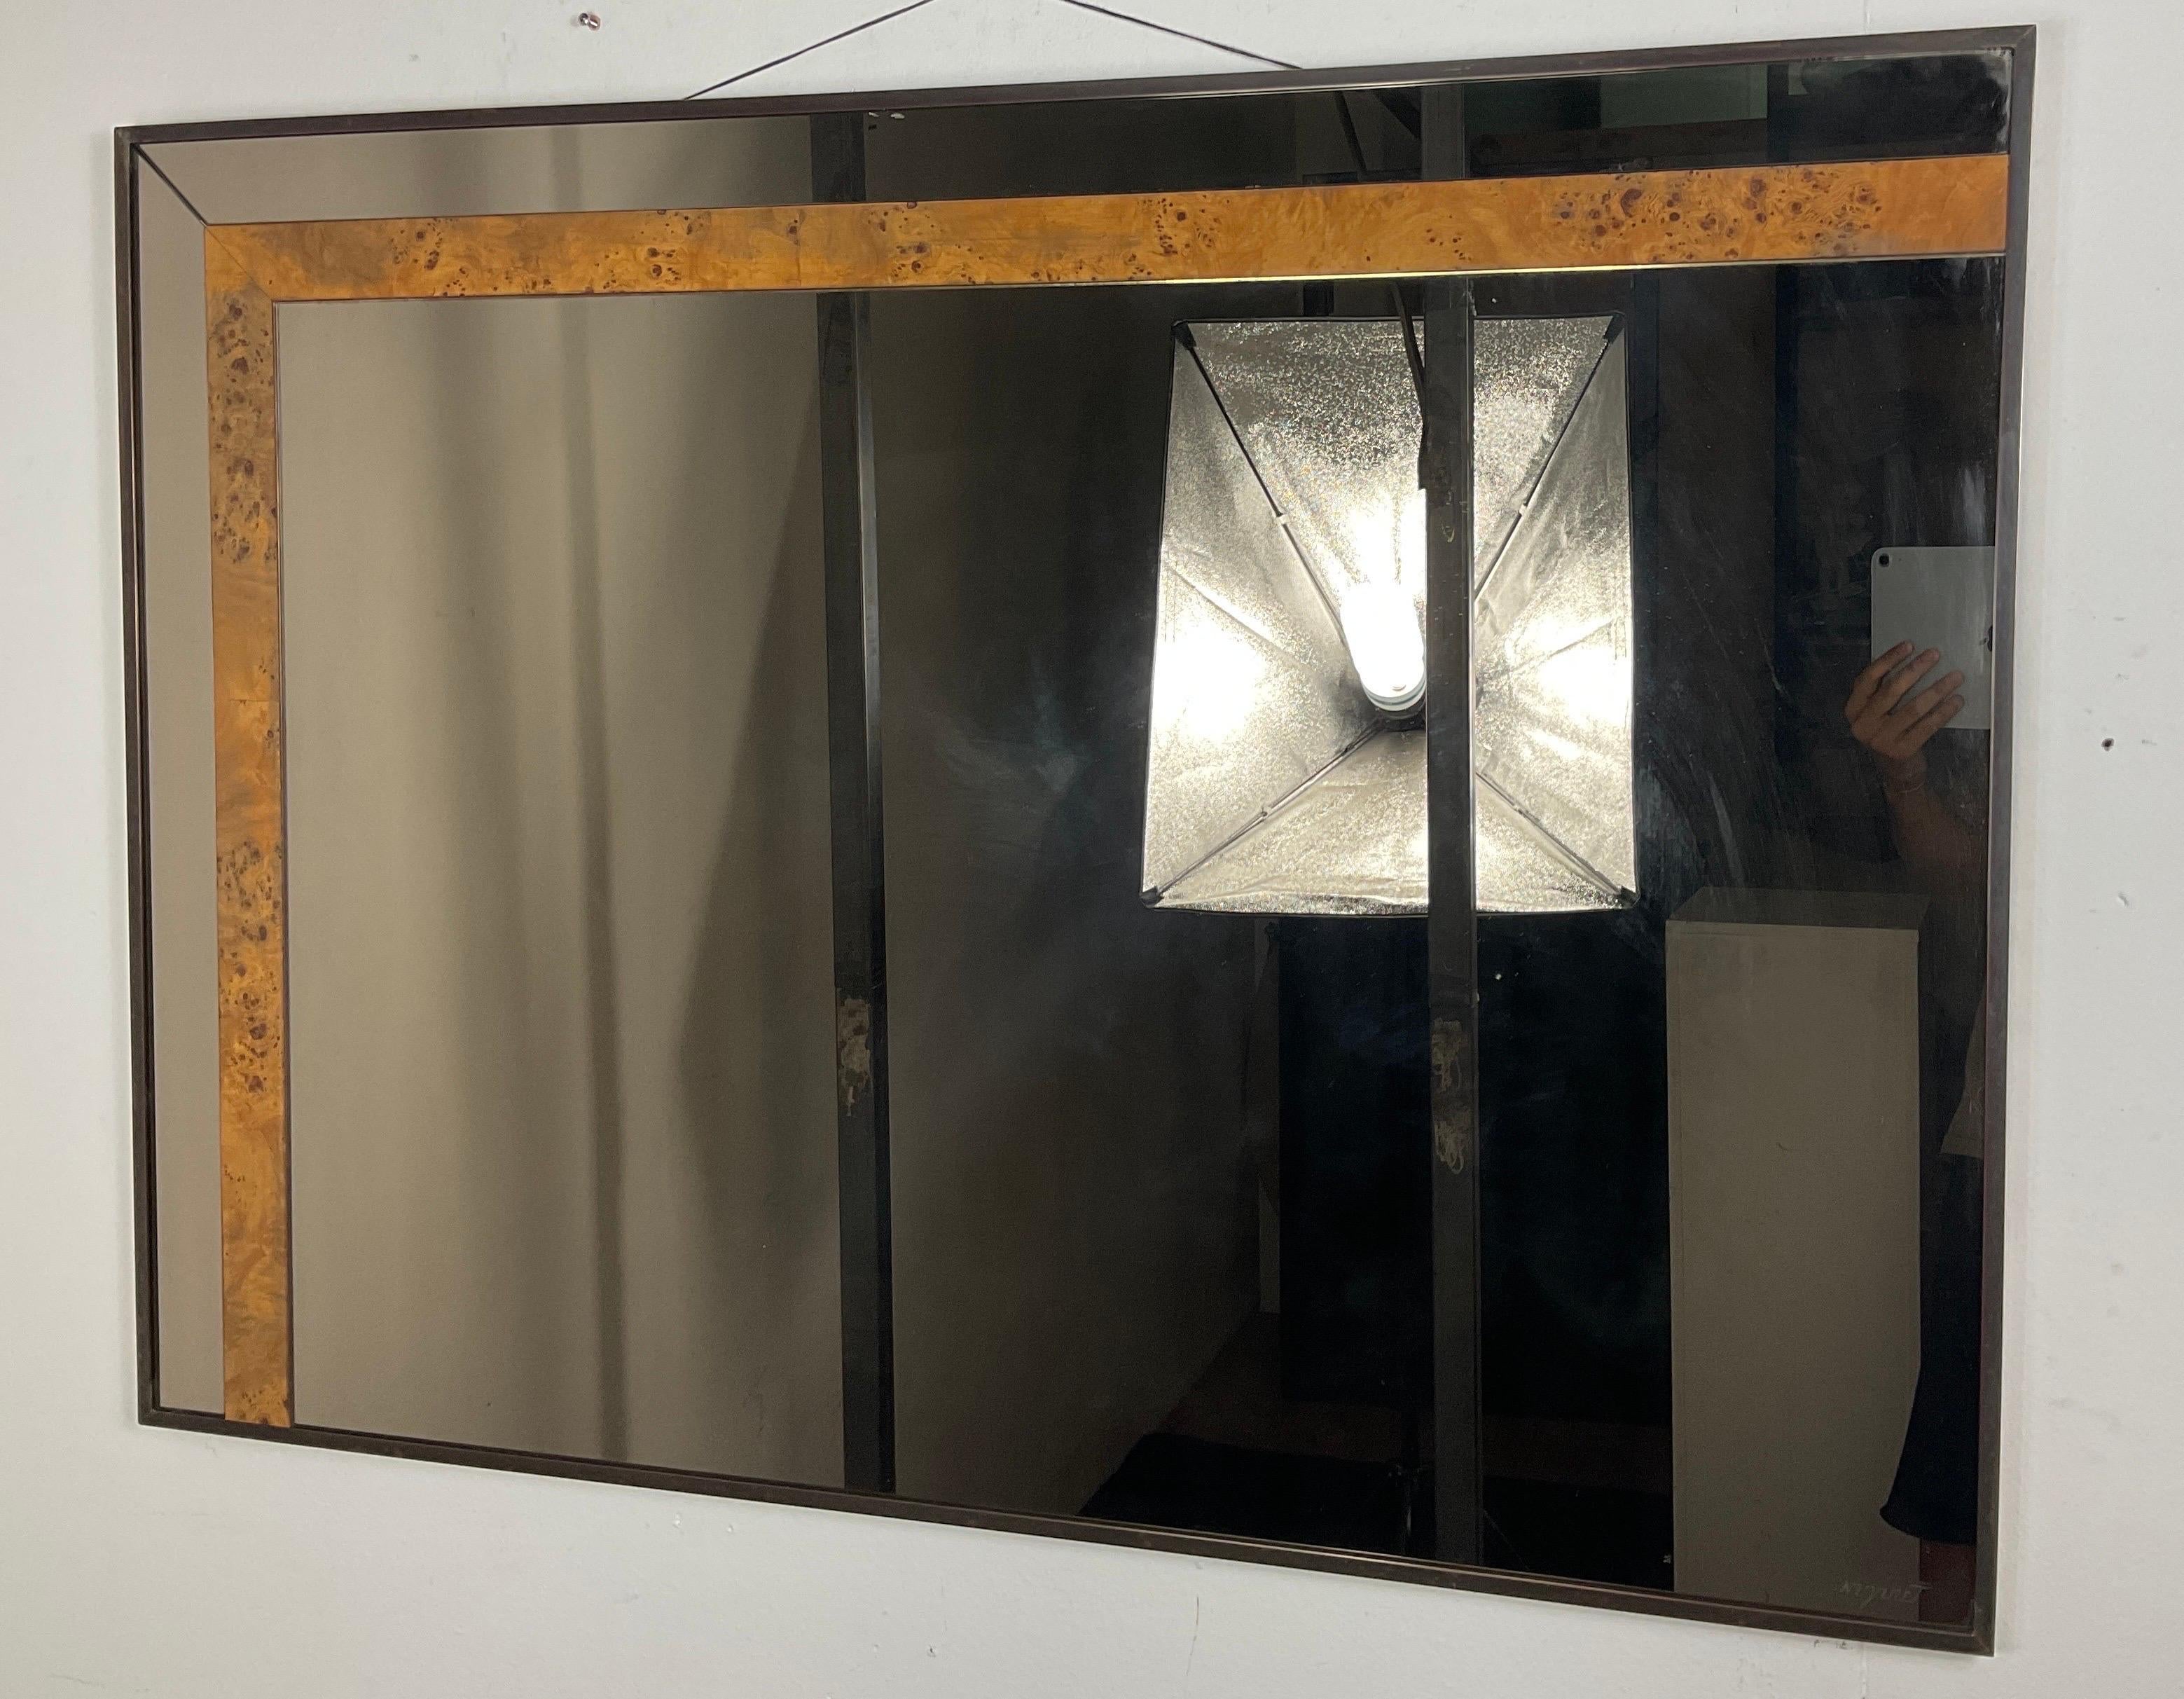 Nazareth mirror from the 70s with brass frame, wood above the mirror frame. In good condition with small wear and tear caused by use and the passing of years